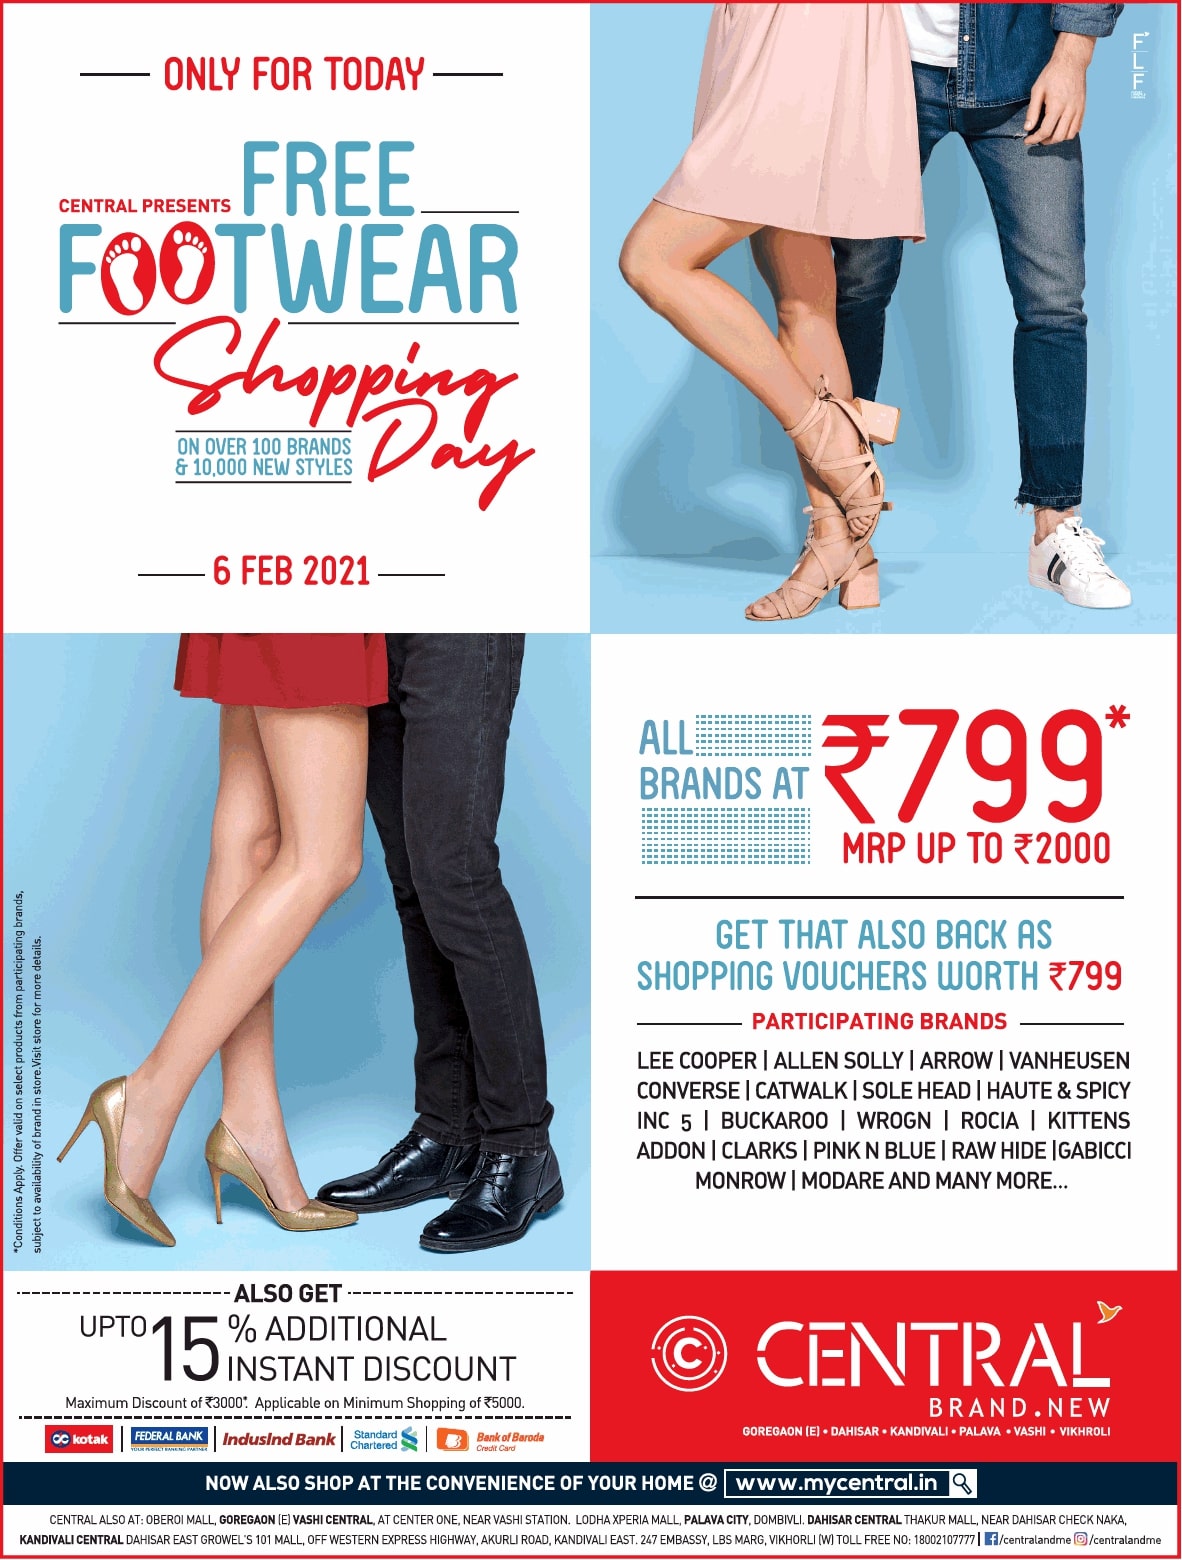 central-free-footwear-shopping-day-ad-bombay-times-06-02-2021